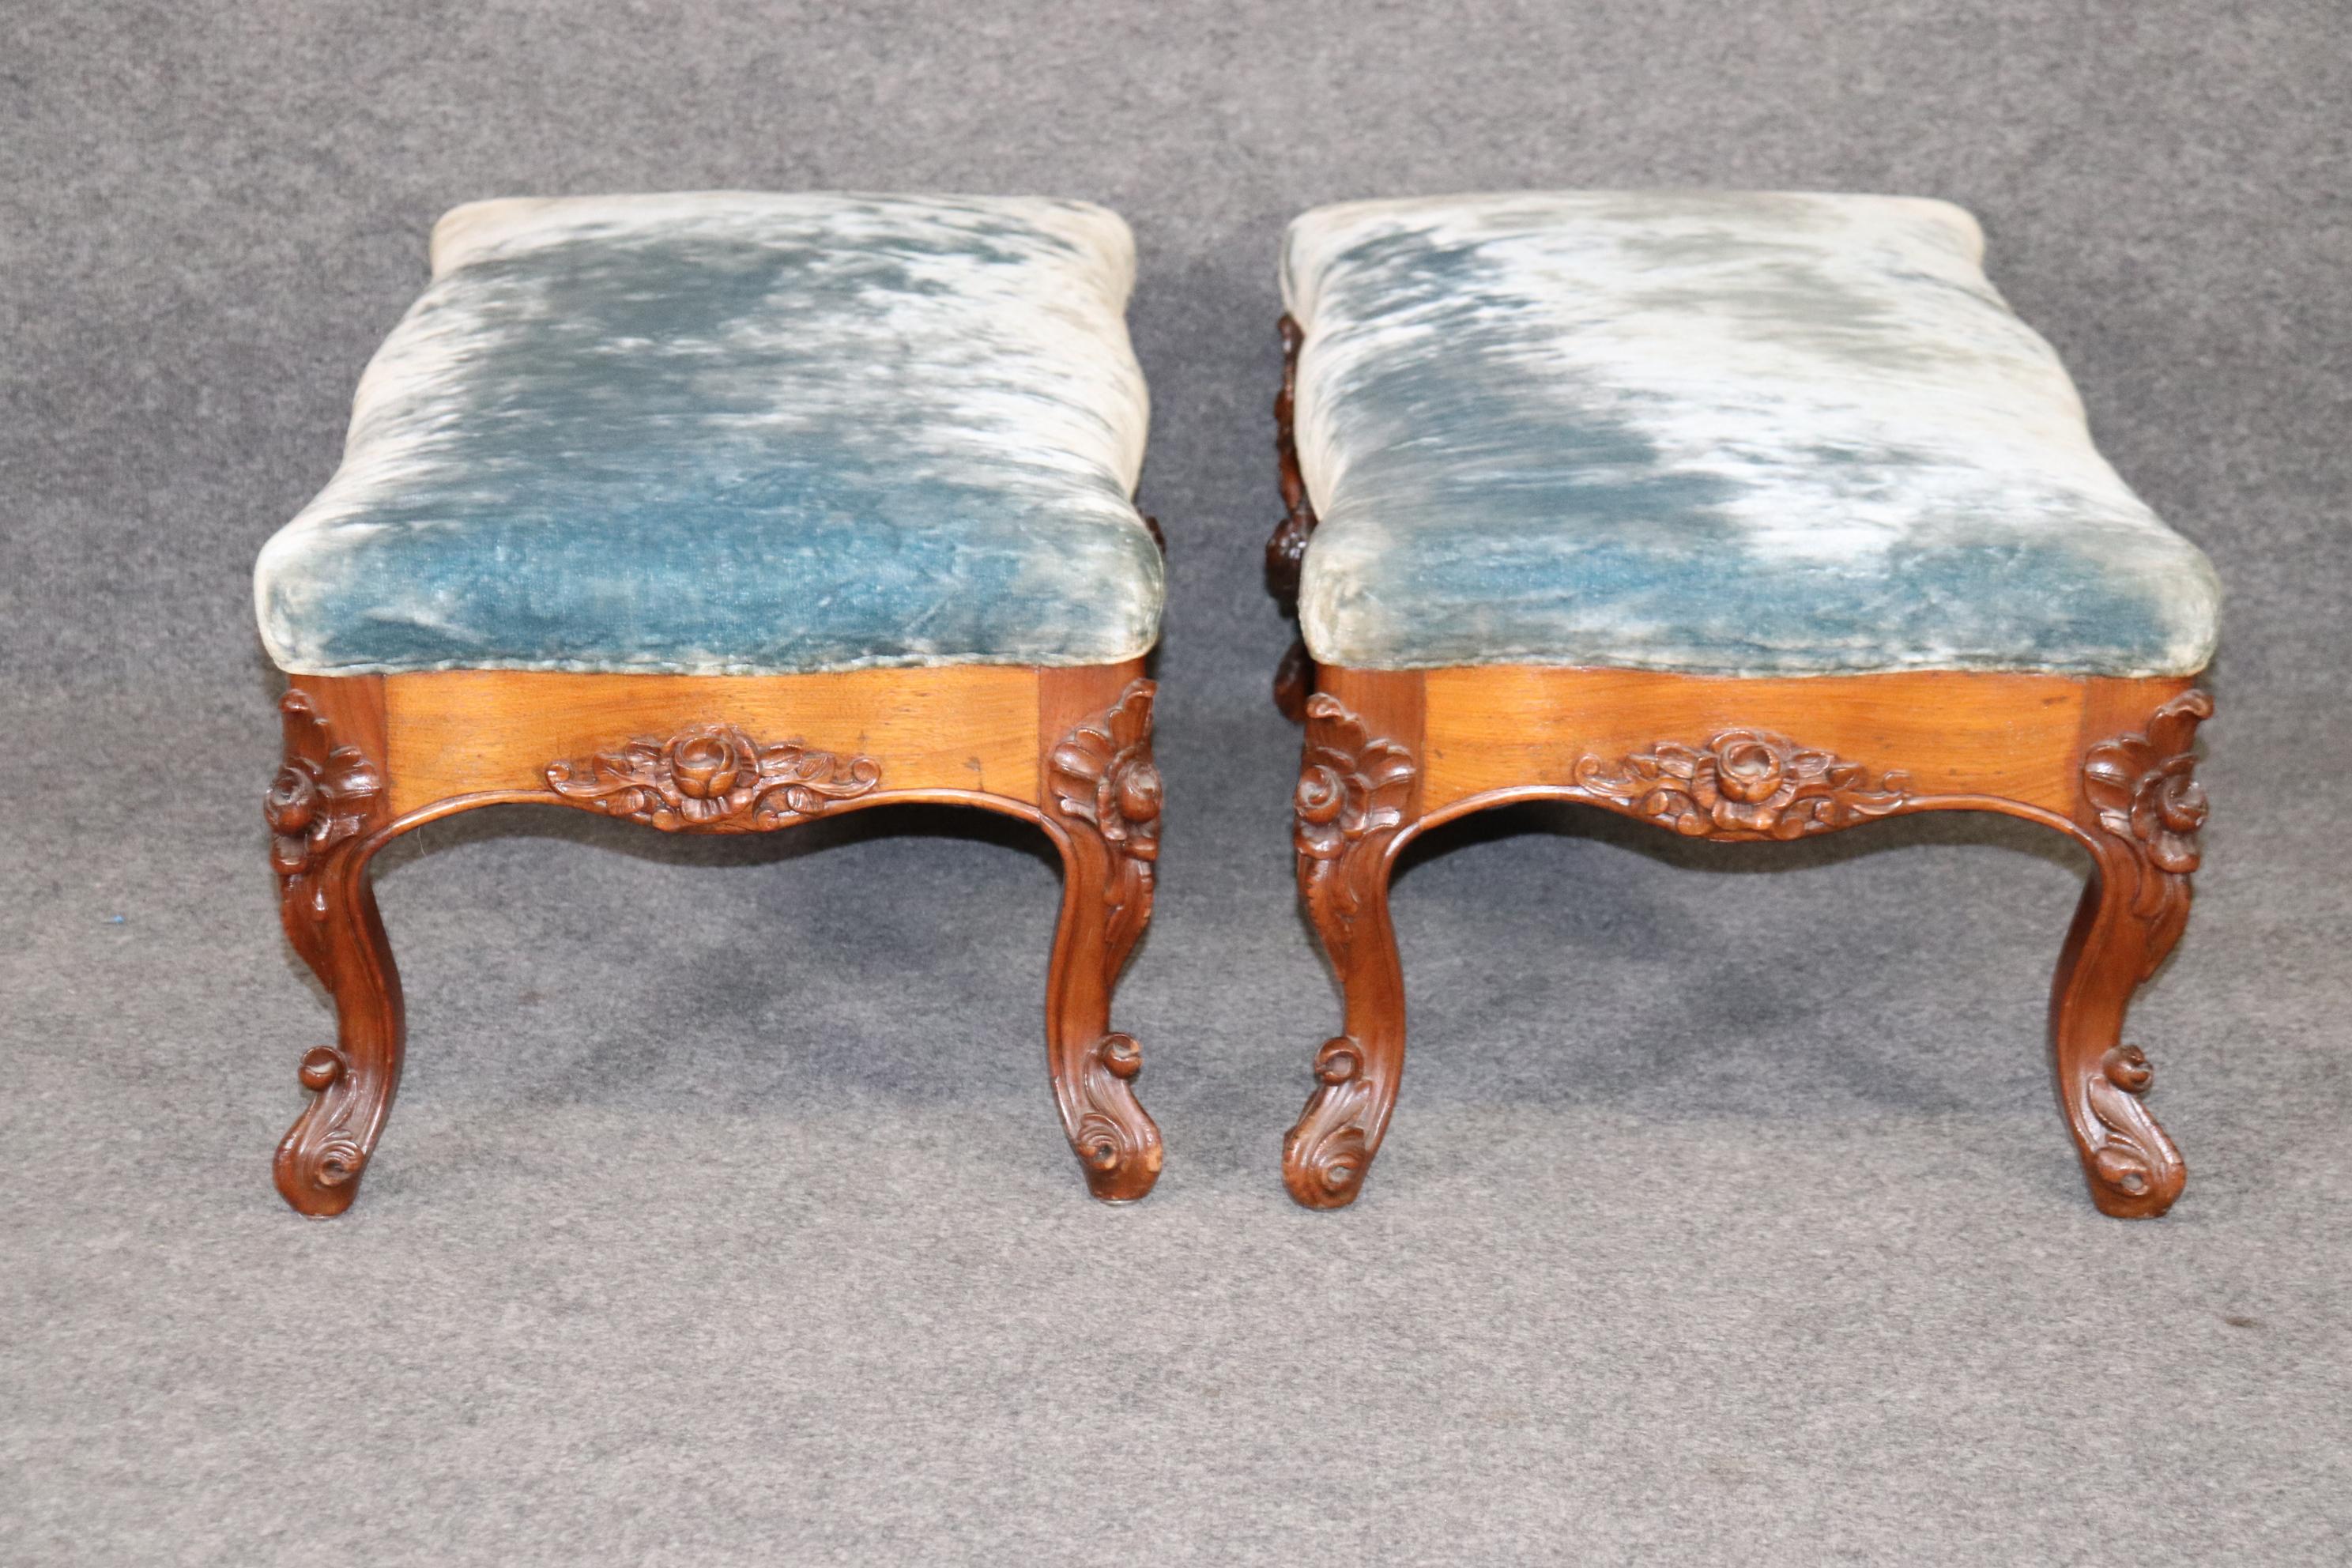 Pair of Rare Walnut American Victorian Foot Stools Attributed to Belter  For Sale 2